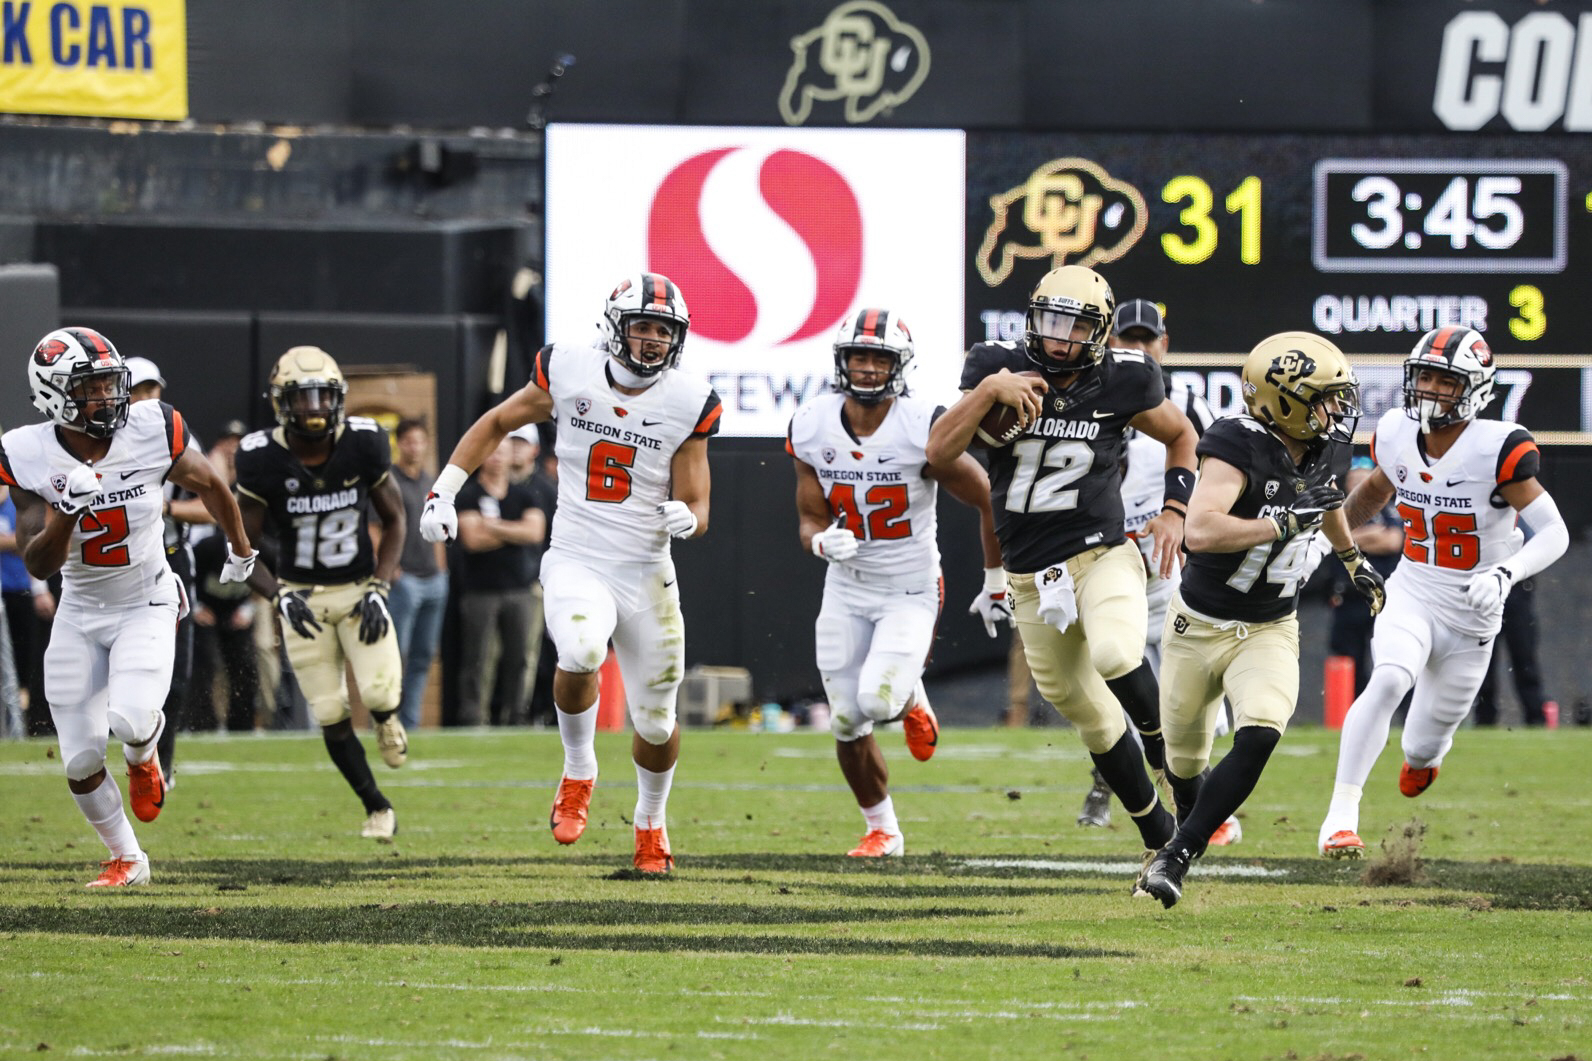 Colorado shocked by Oregon State in 41-34 OT loss